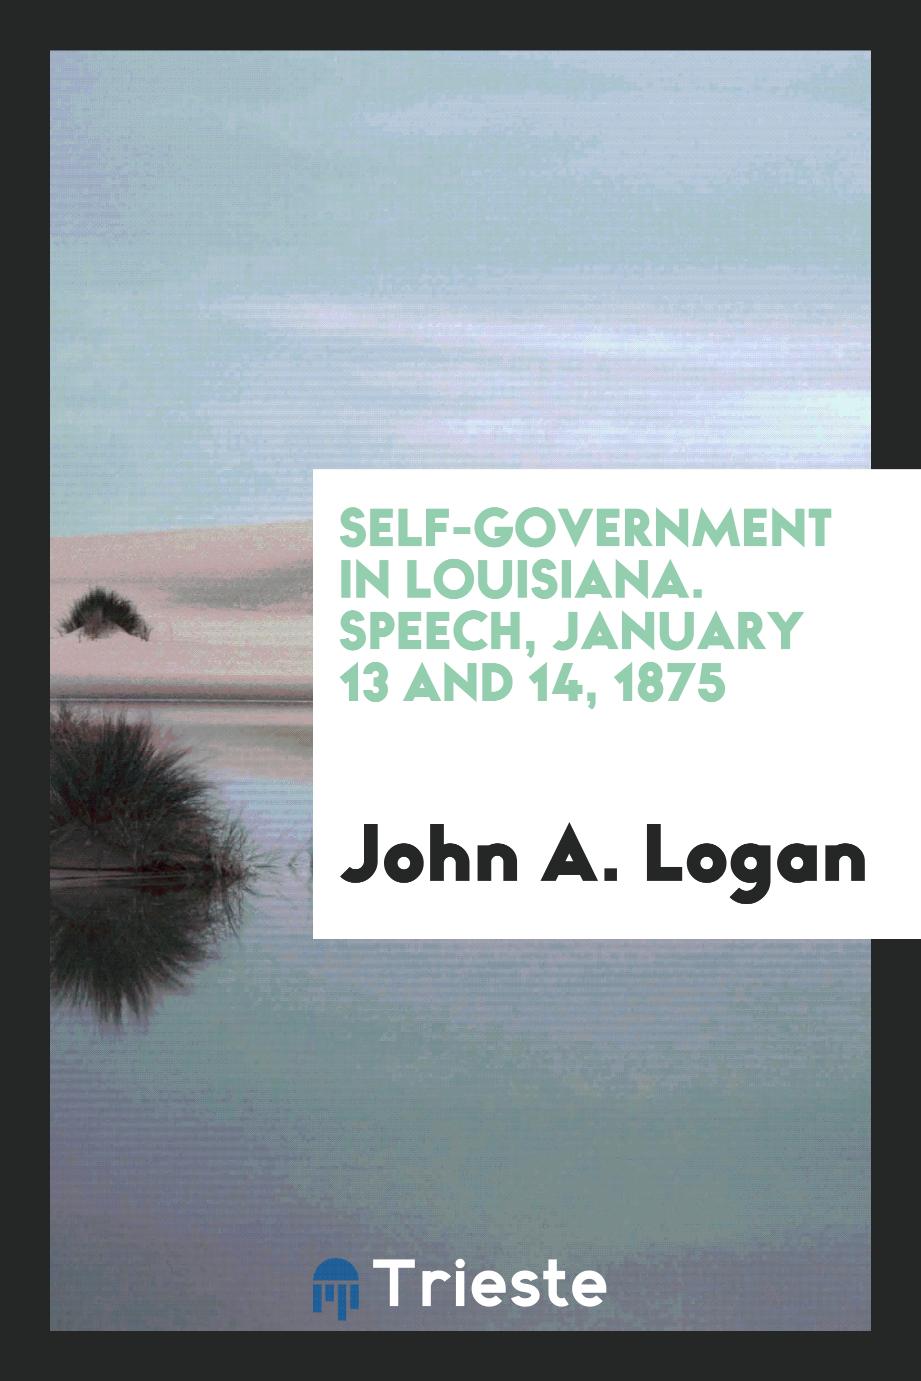 Self-government in Louisiana. Speech, January 13 and 14, 1875